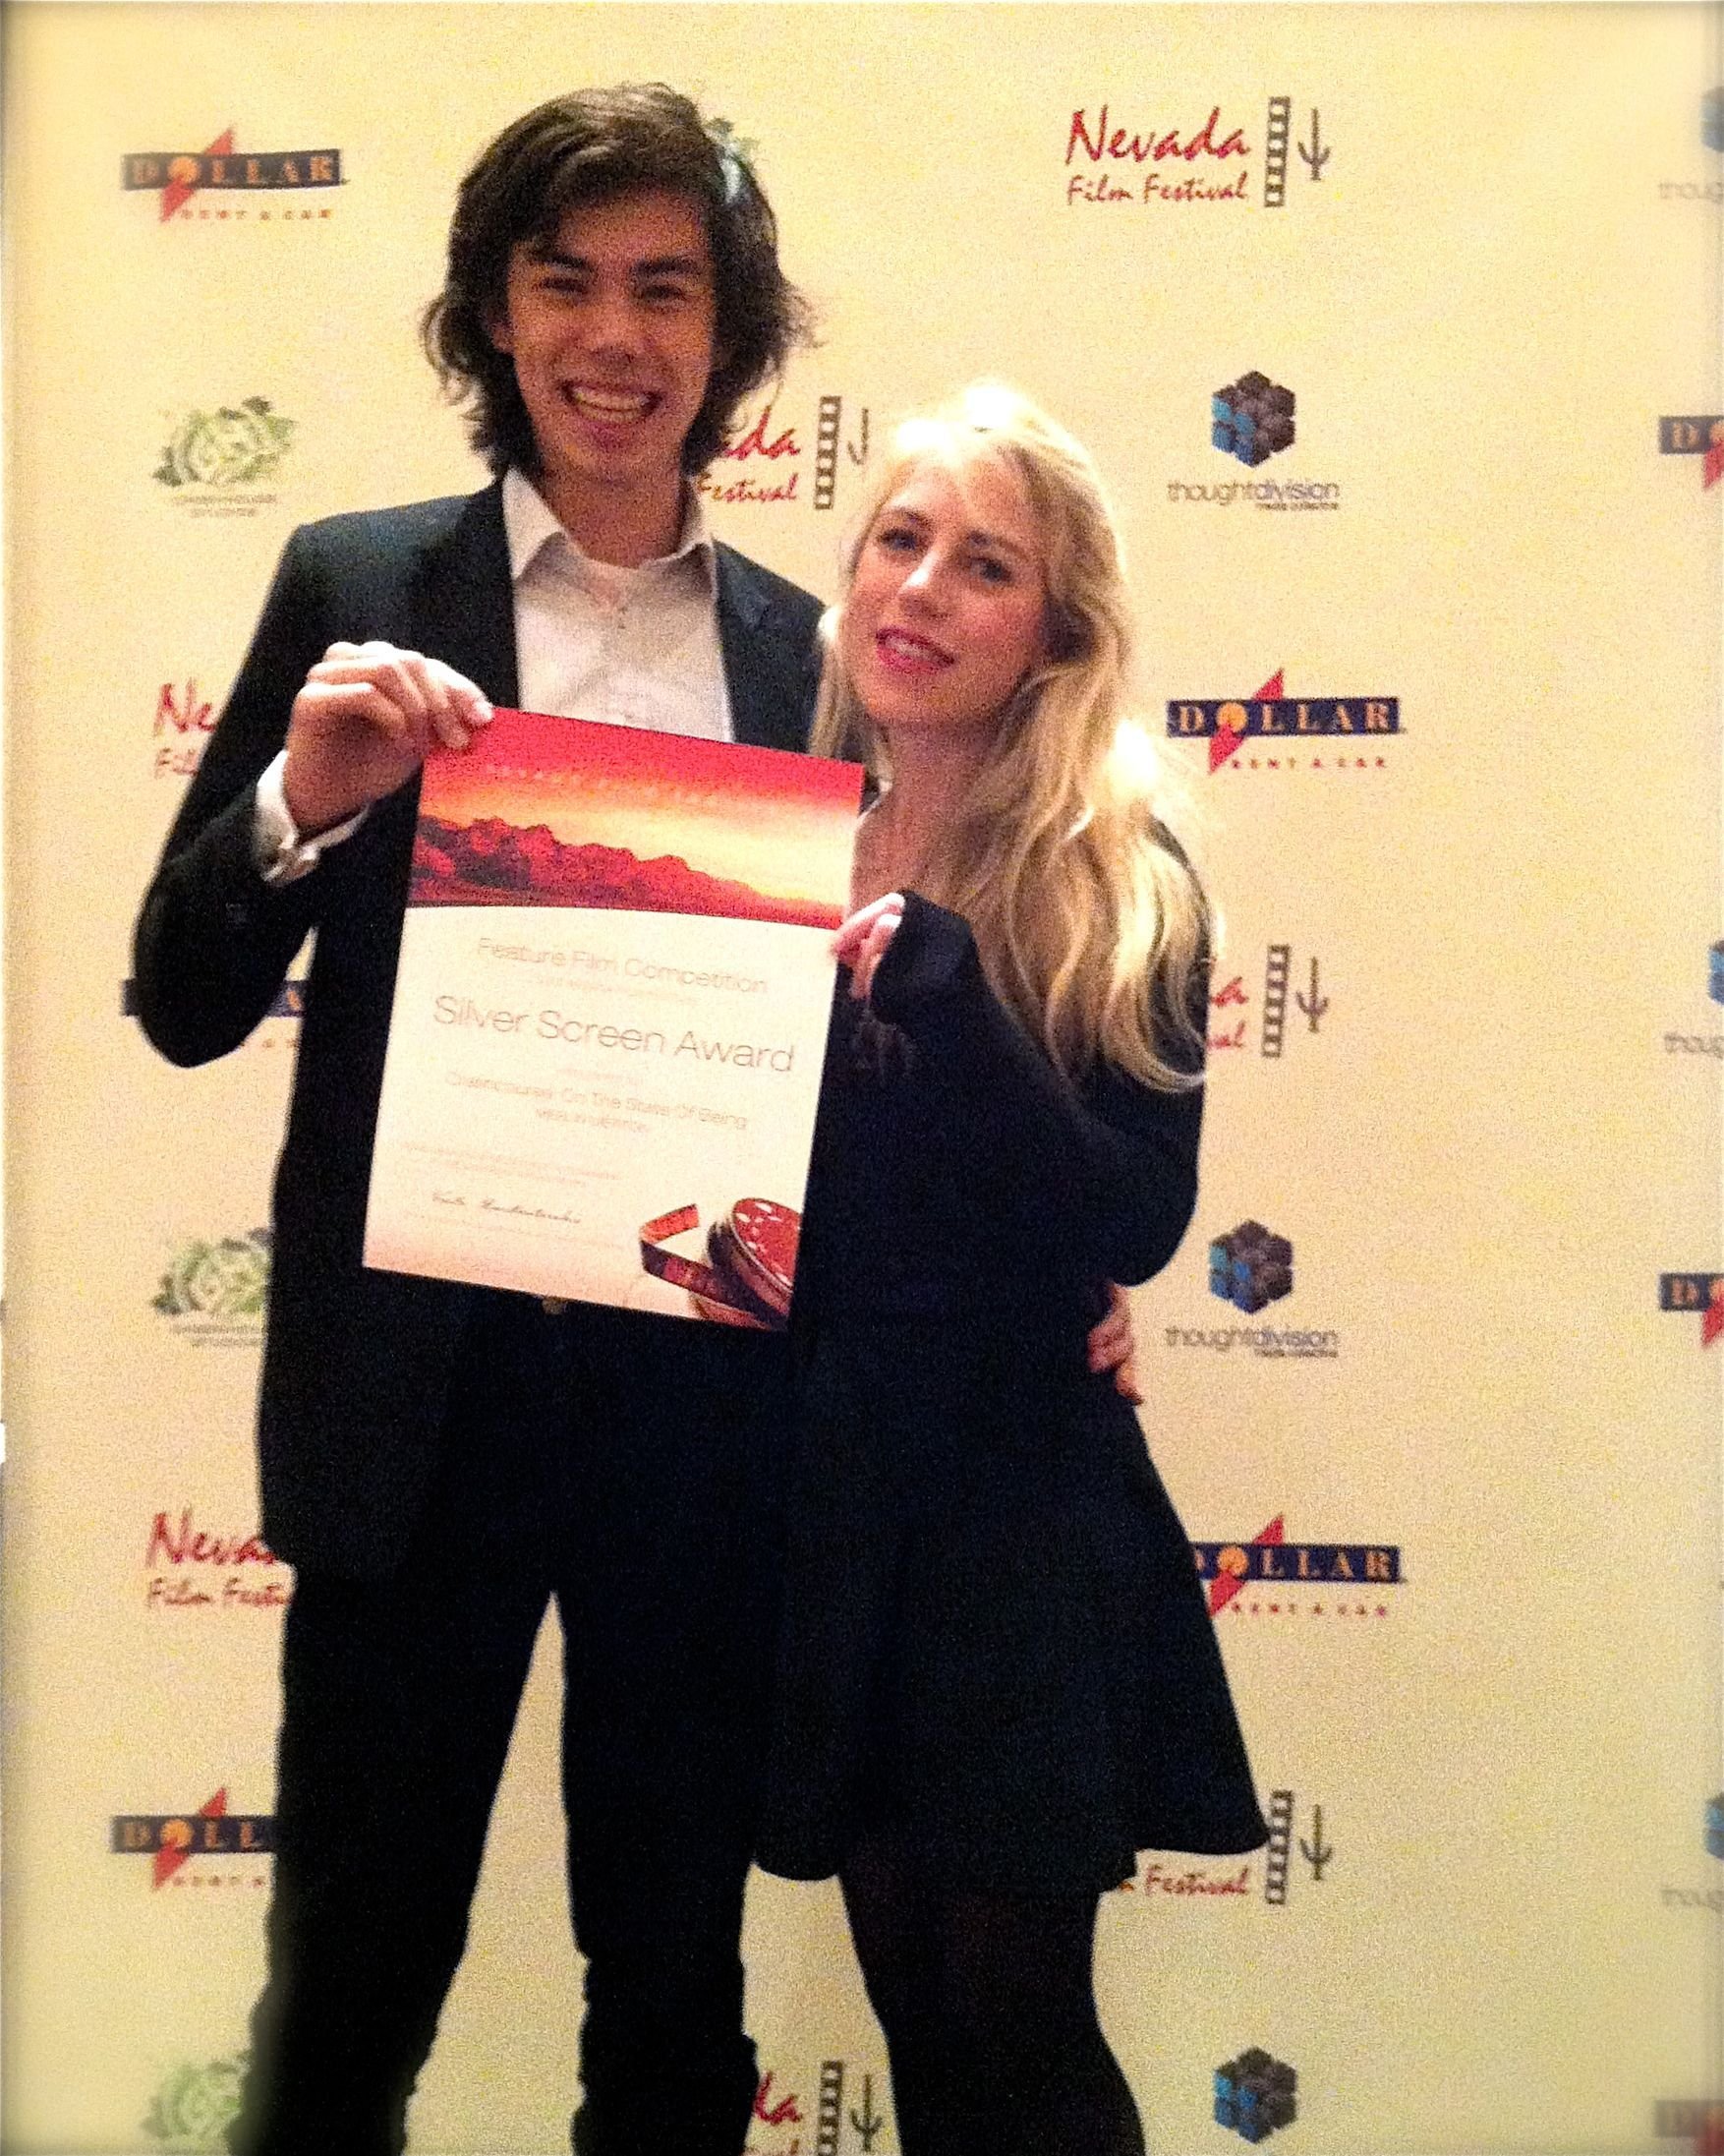 Silver Screen Award for feature film competition at the NEVADA FILM FESTIVAL 2012